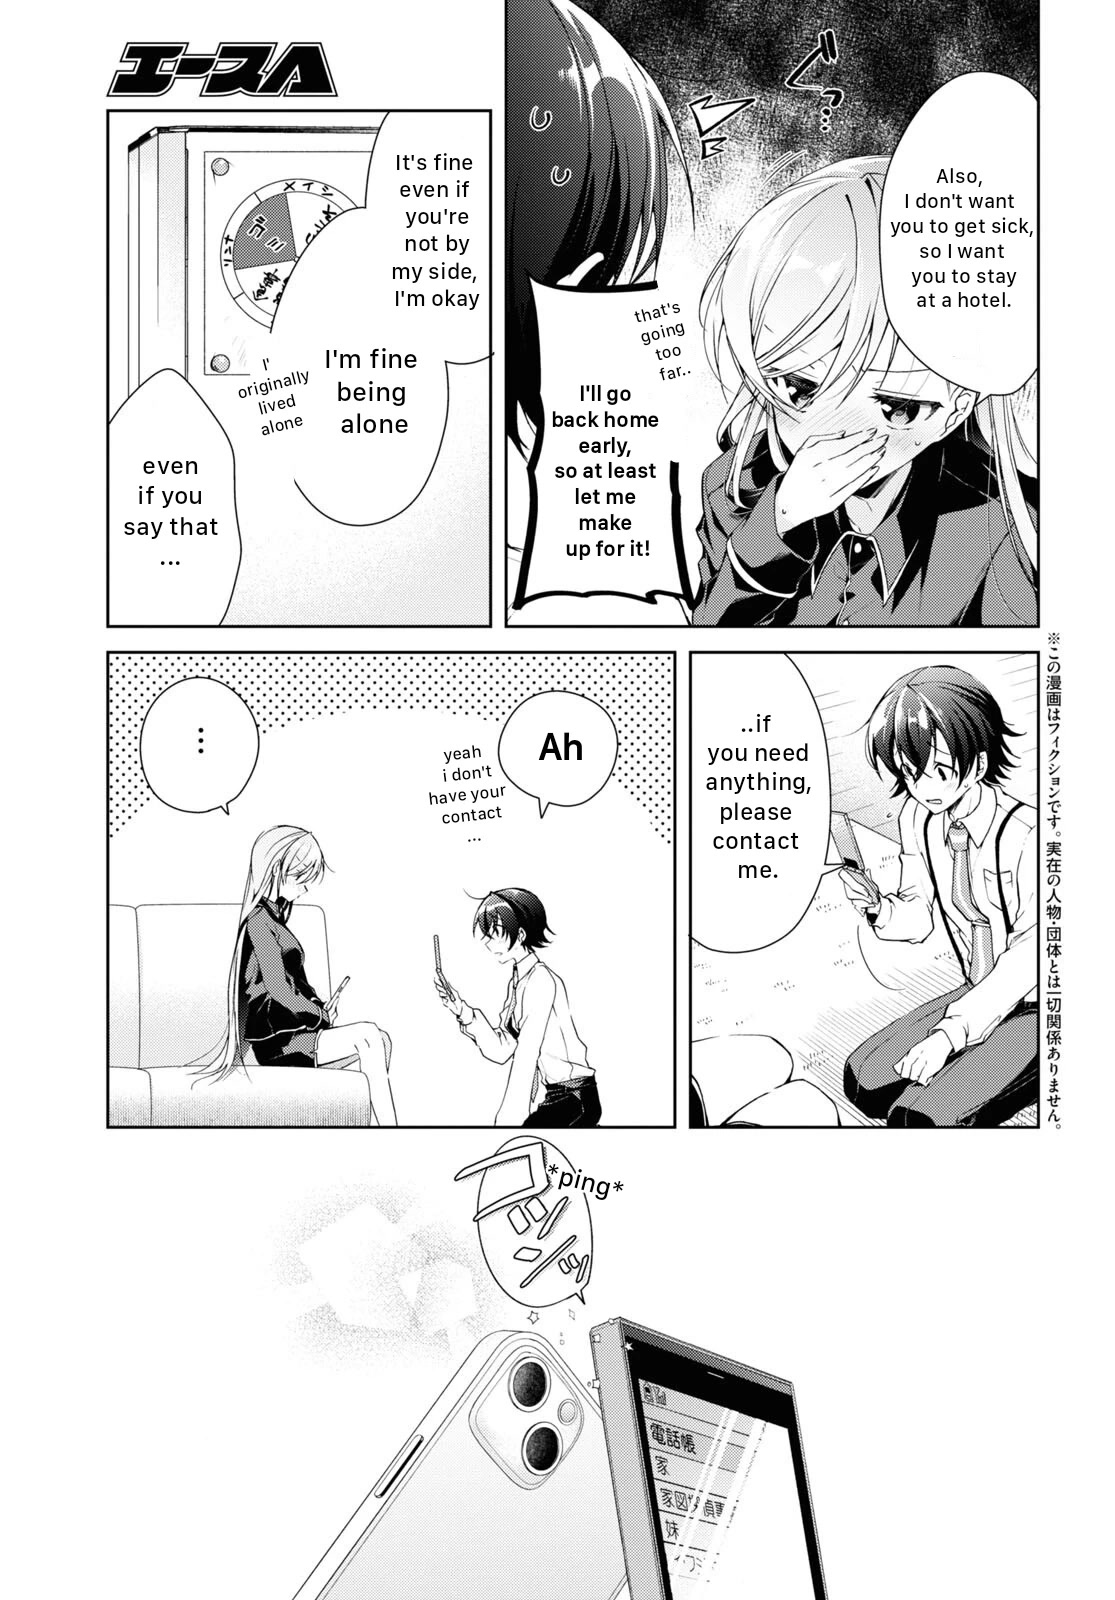 Isshiki-san Wants to Know About Love. - chapter 21 - #5